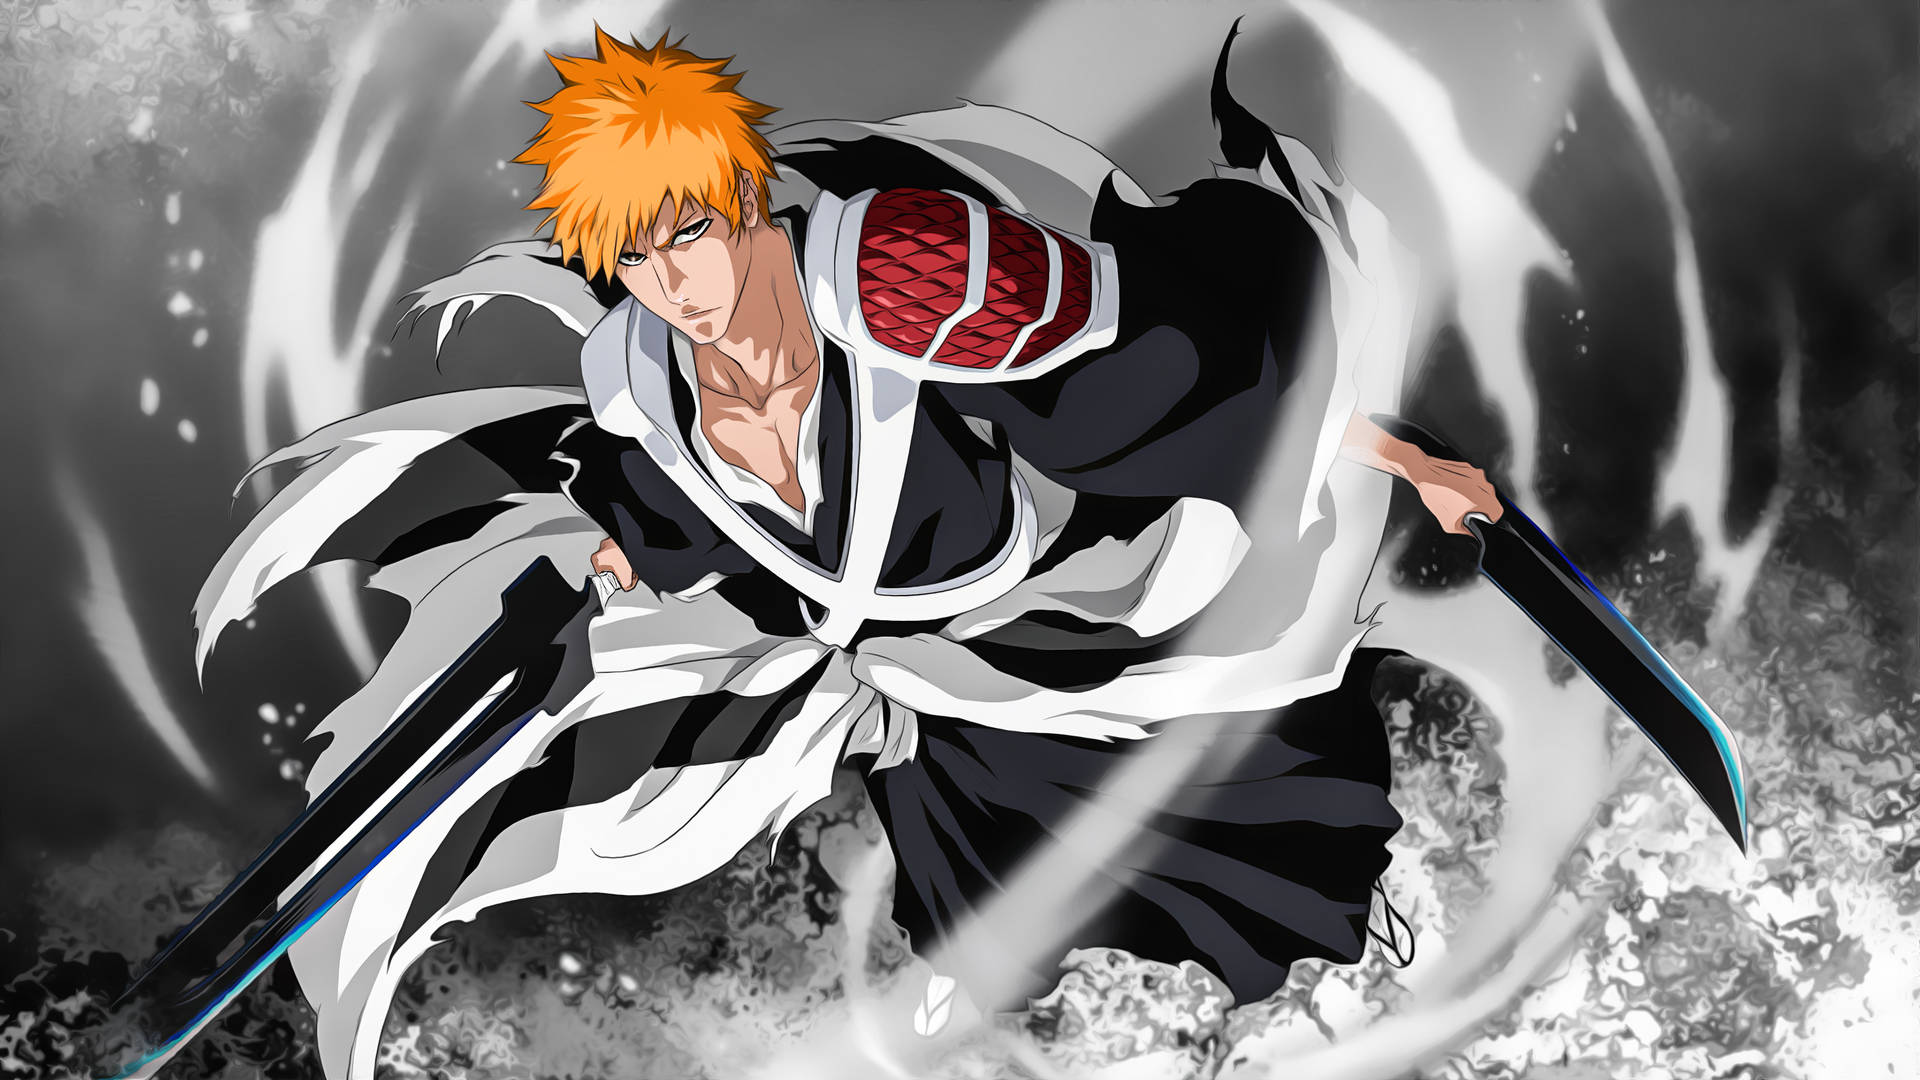 Free Bleach Anime Wallpaper Downloads, [200+] Bleach Anime Wallpapers for  FREE 